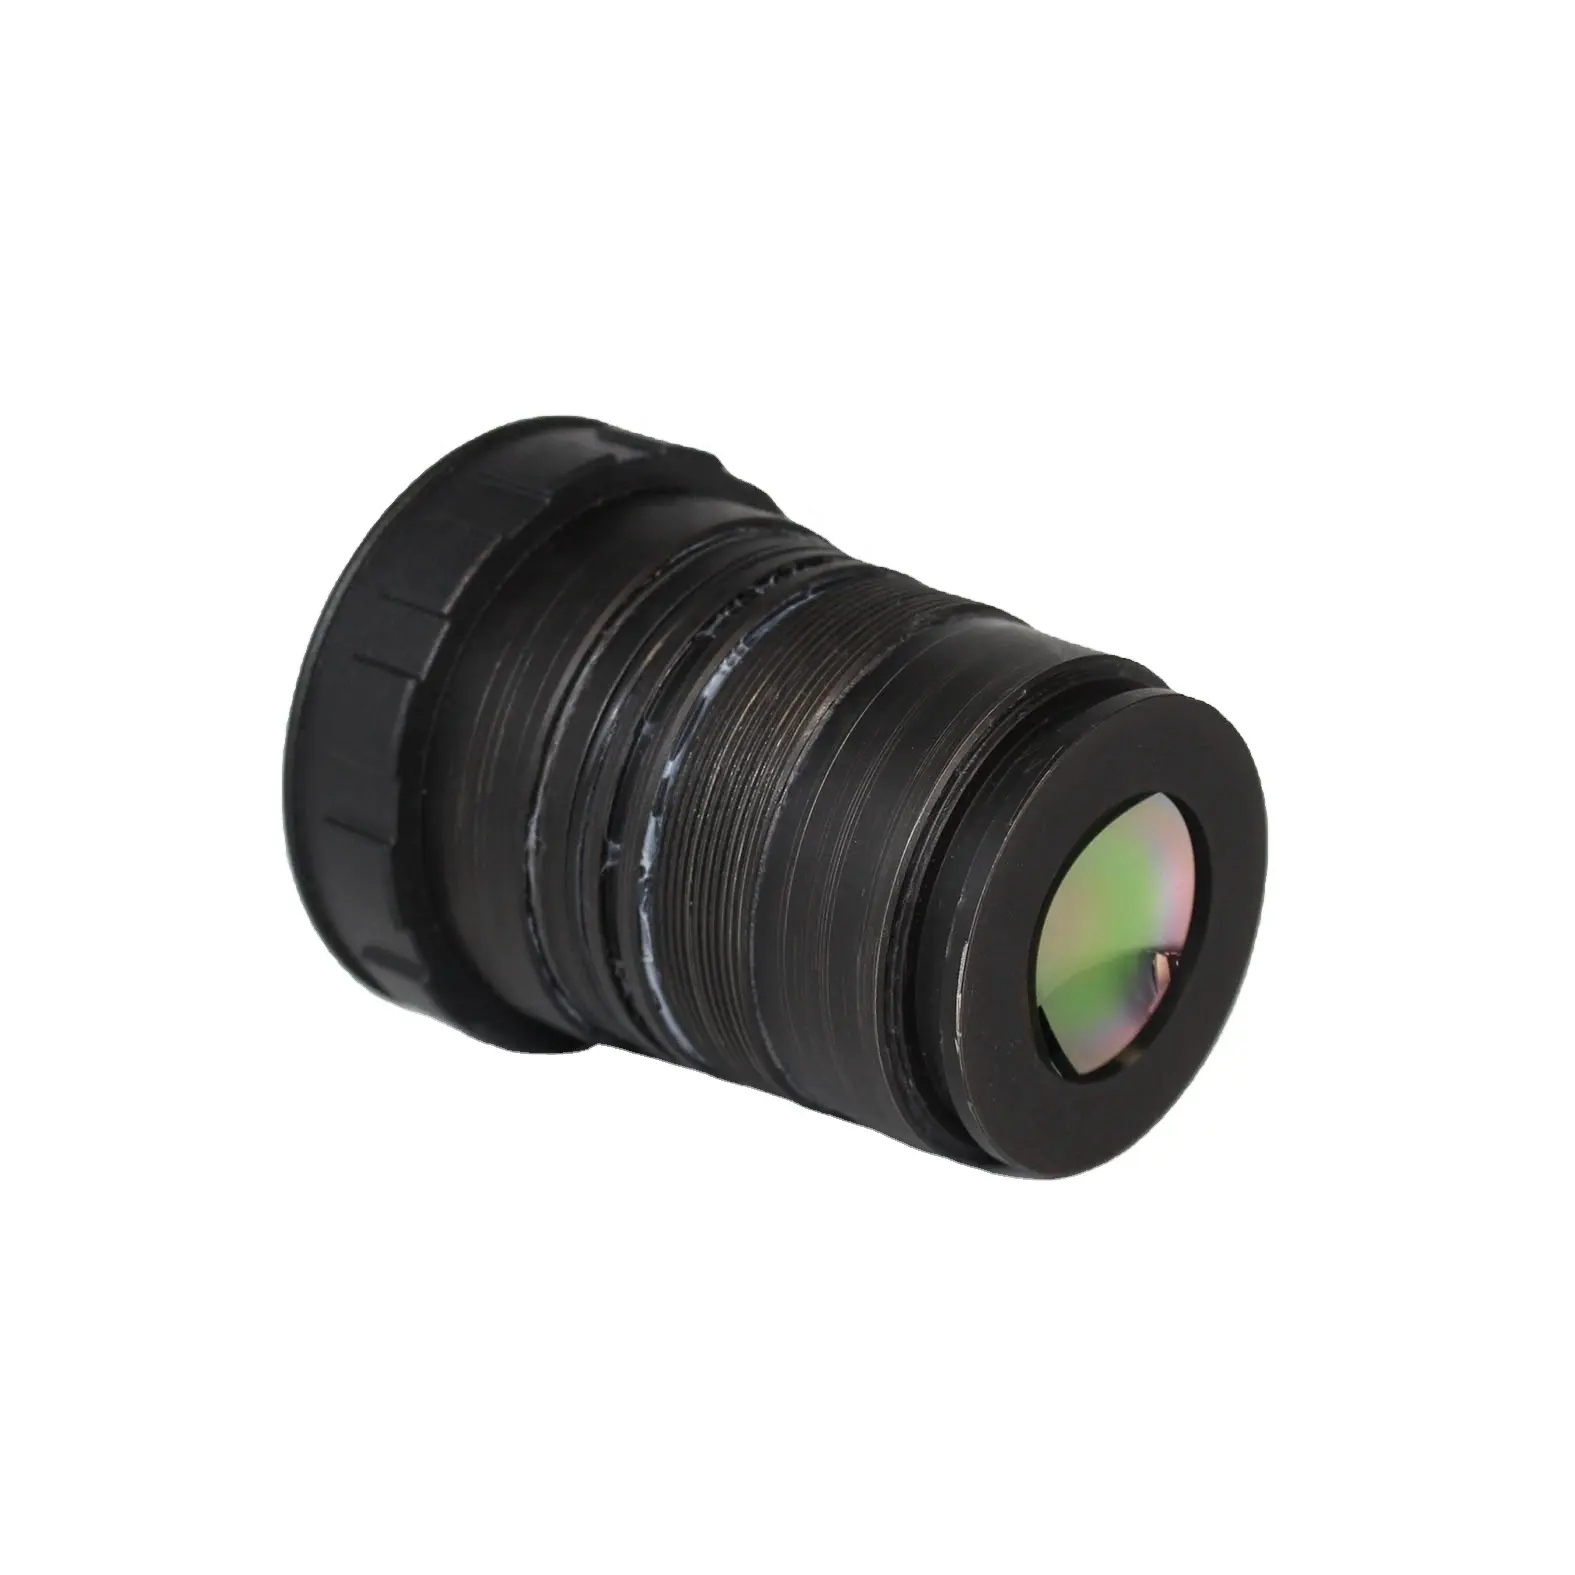 VY Optics China Factory Independent Research Night Vision 48.5mm Infrared Lens For Night Observe Animals